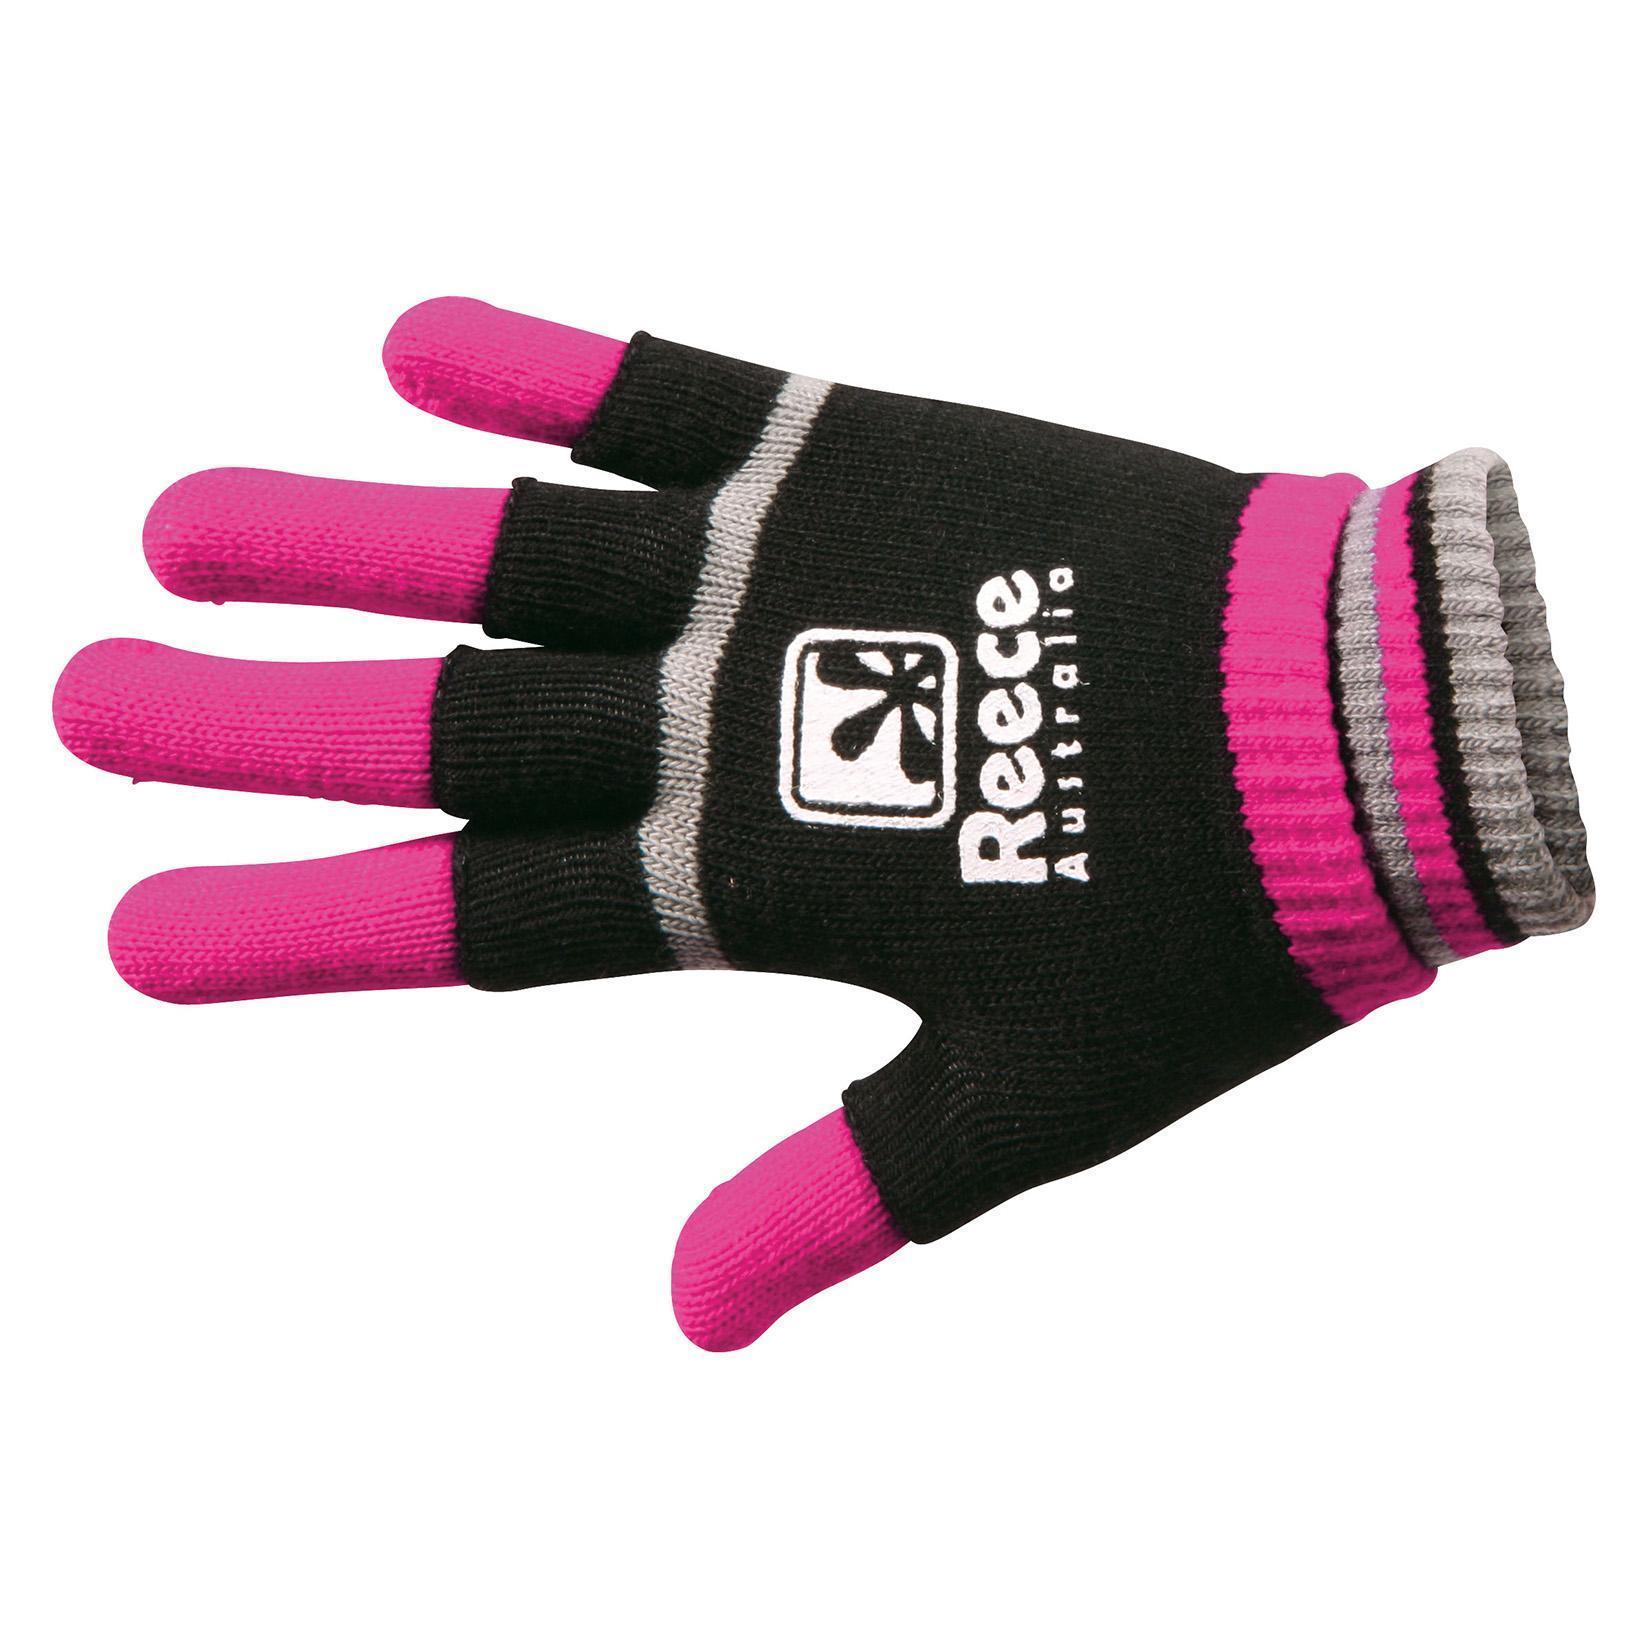 Reece Knitted Player Glove 2 In 1